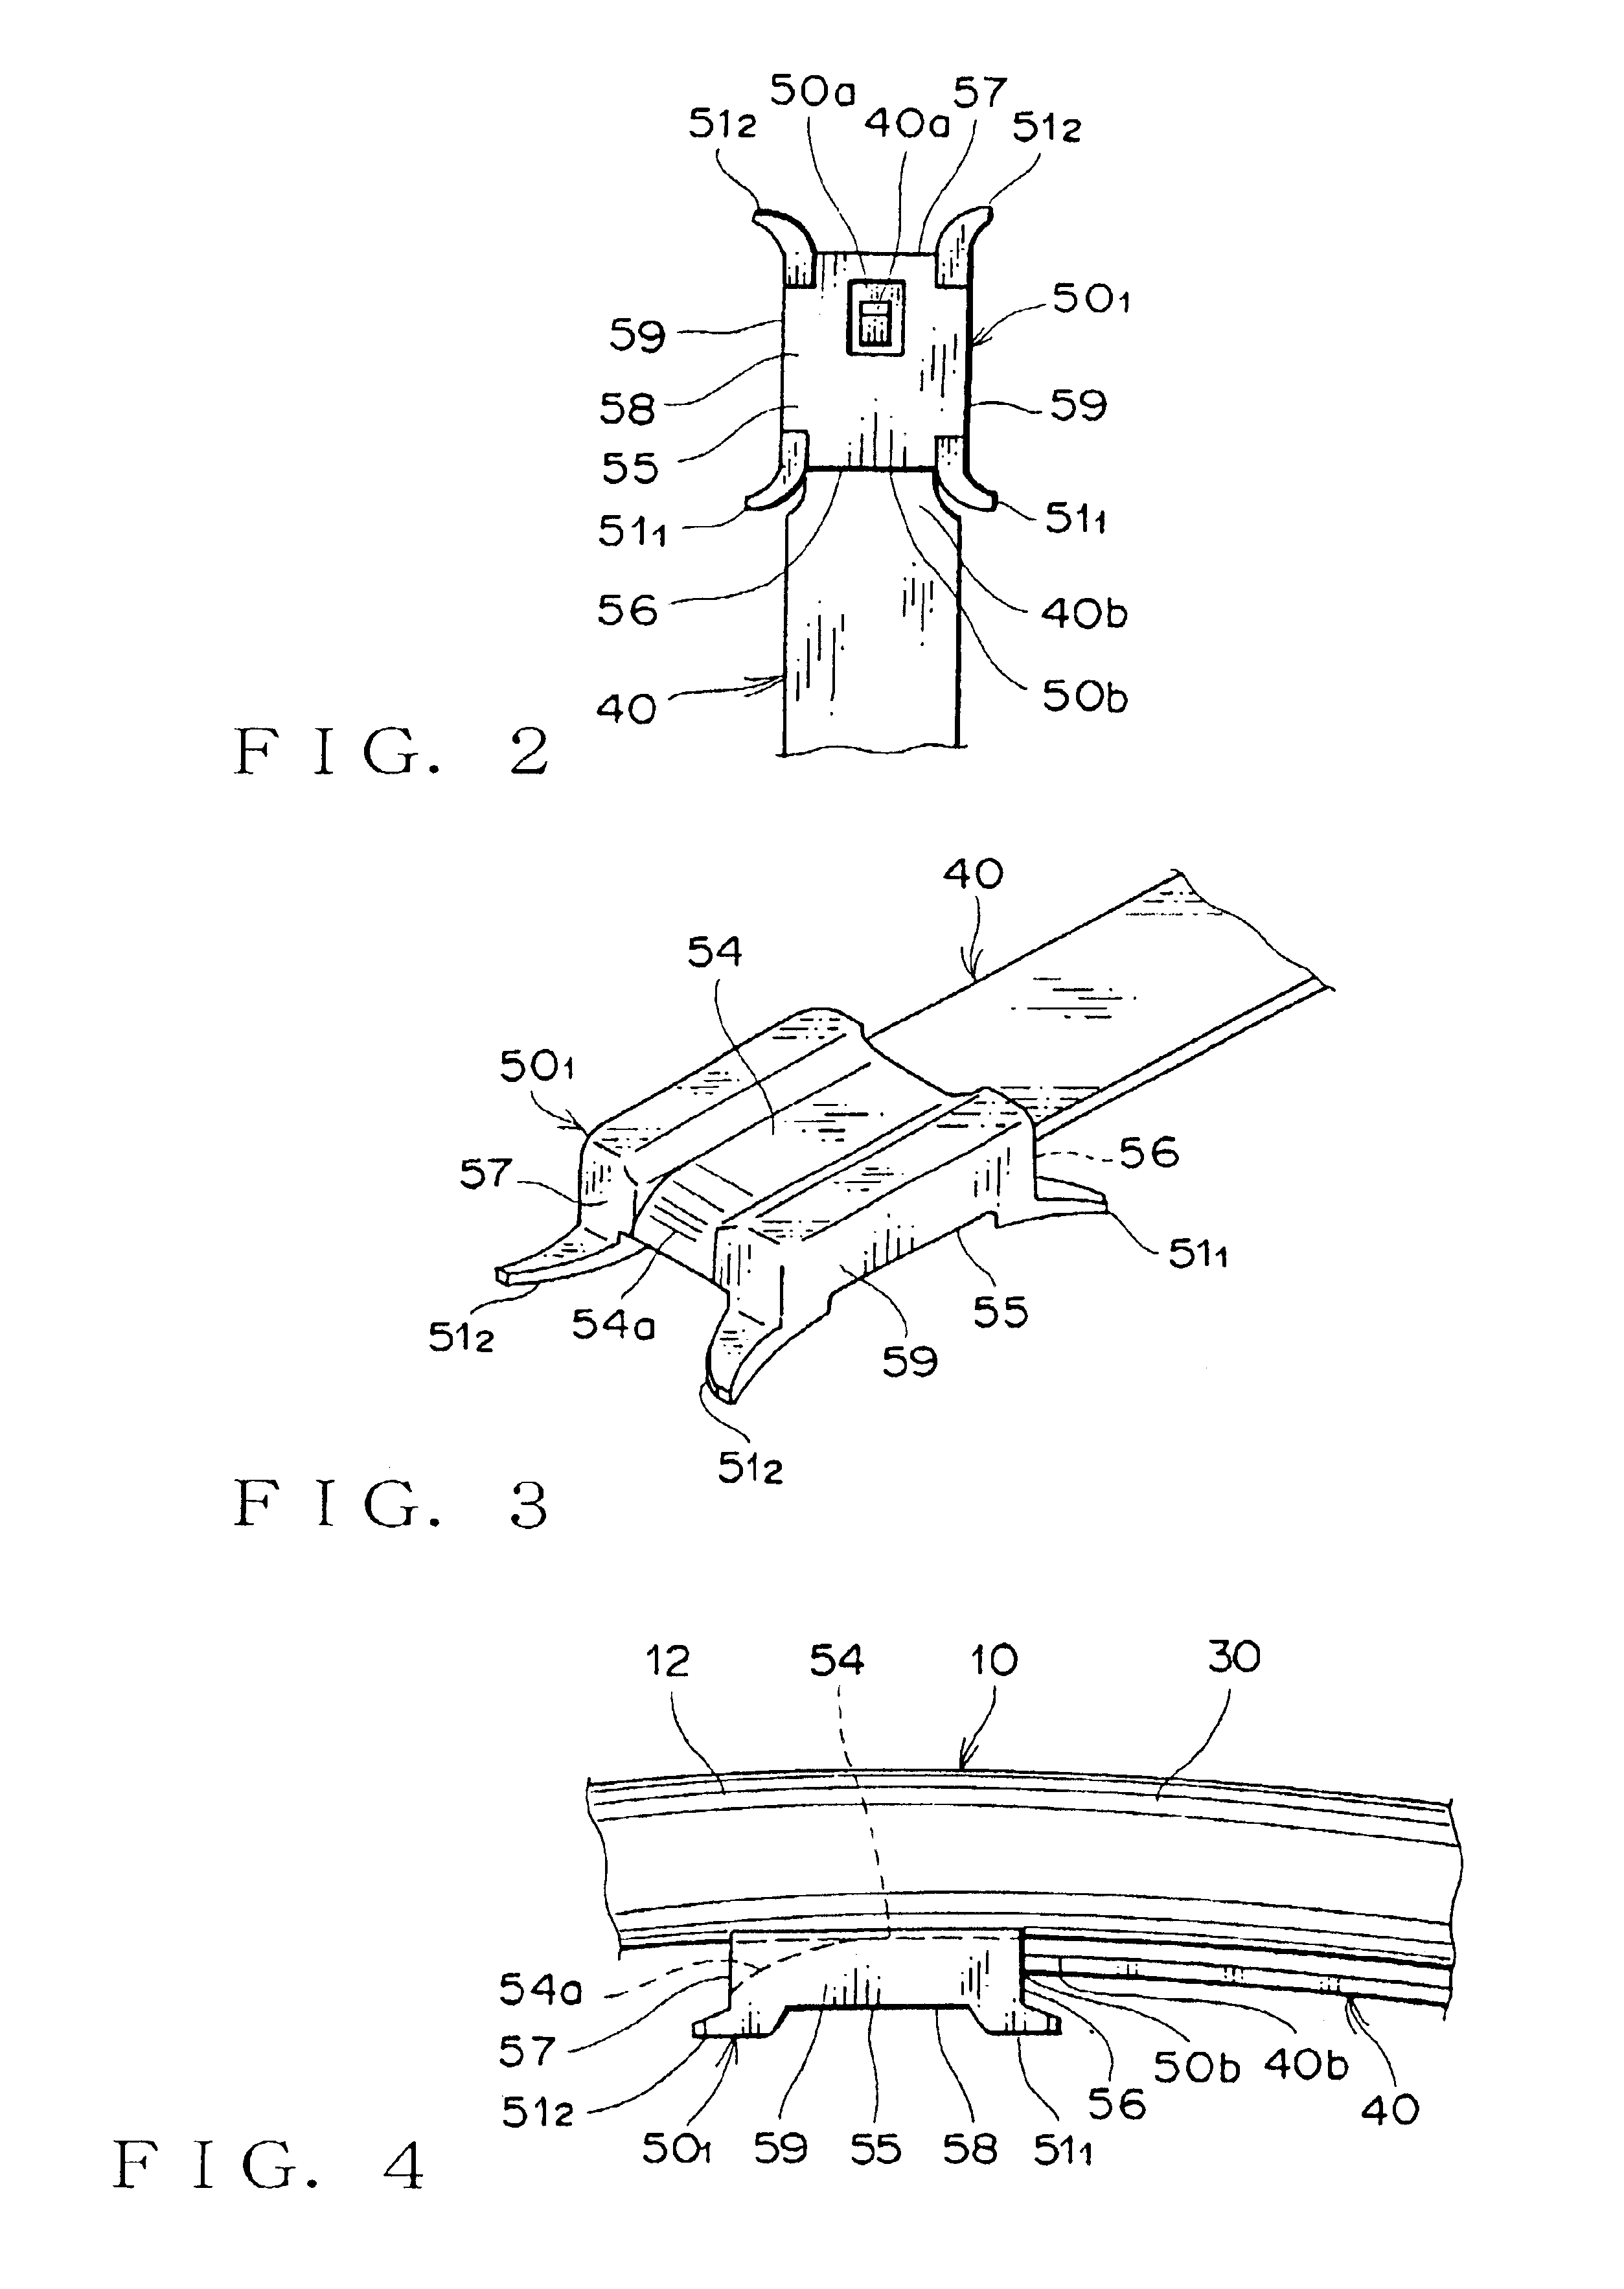 Power supply apparatus with vibration absorbing member for sliding structure